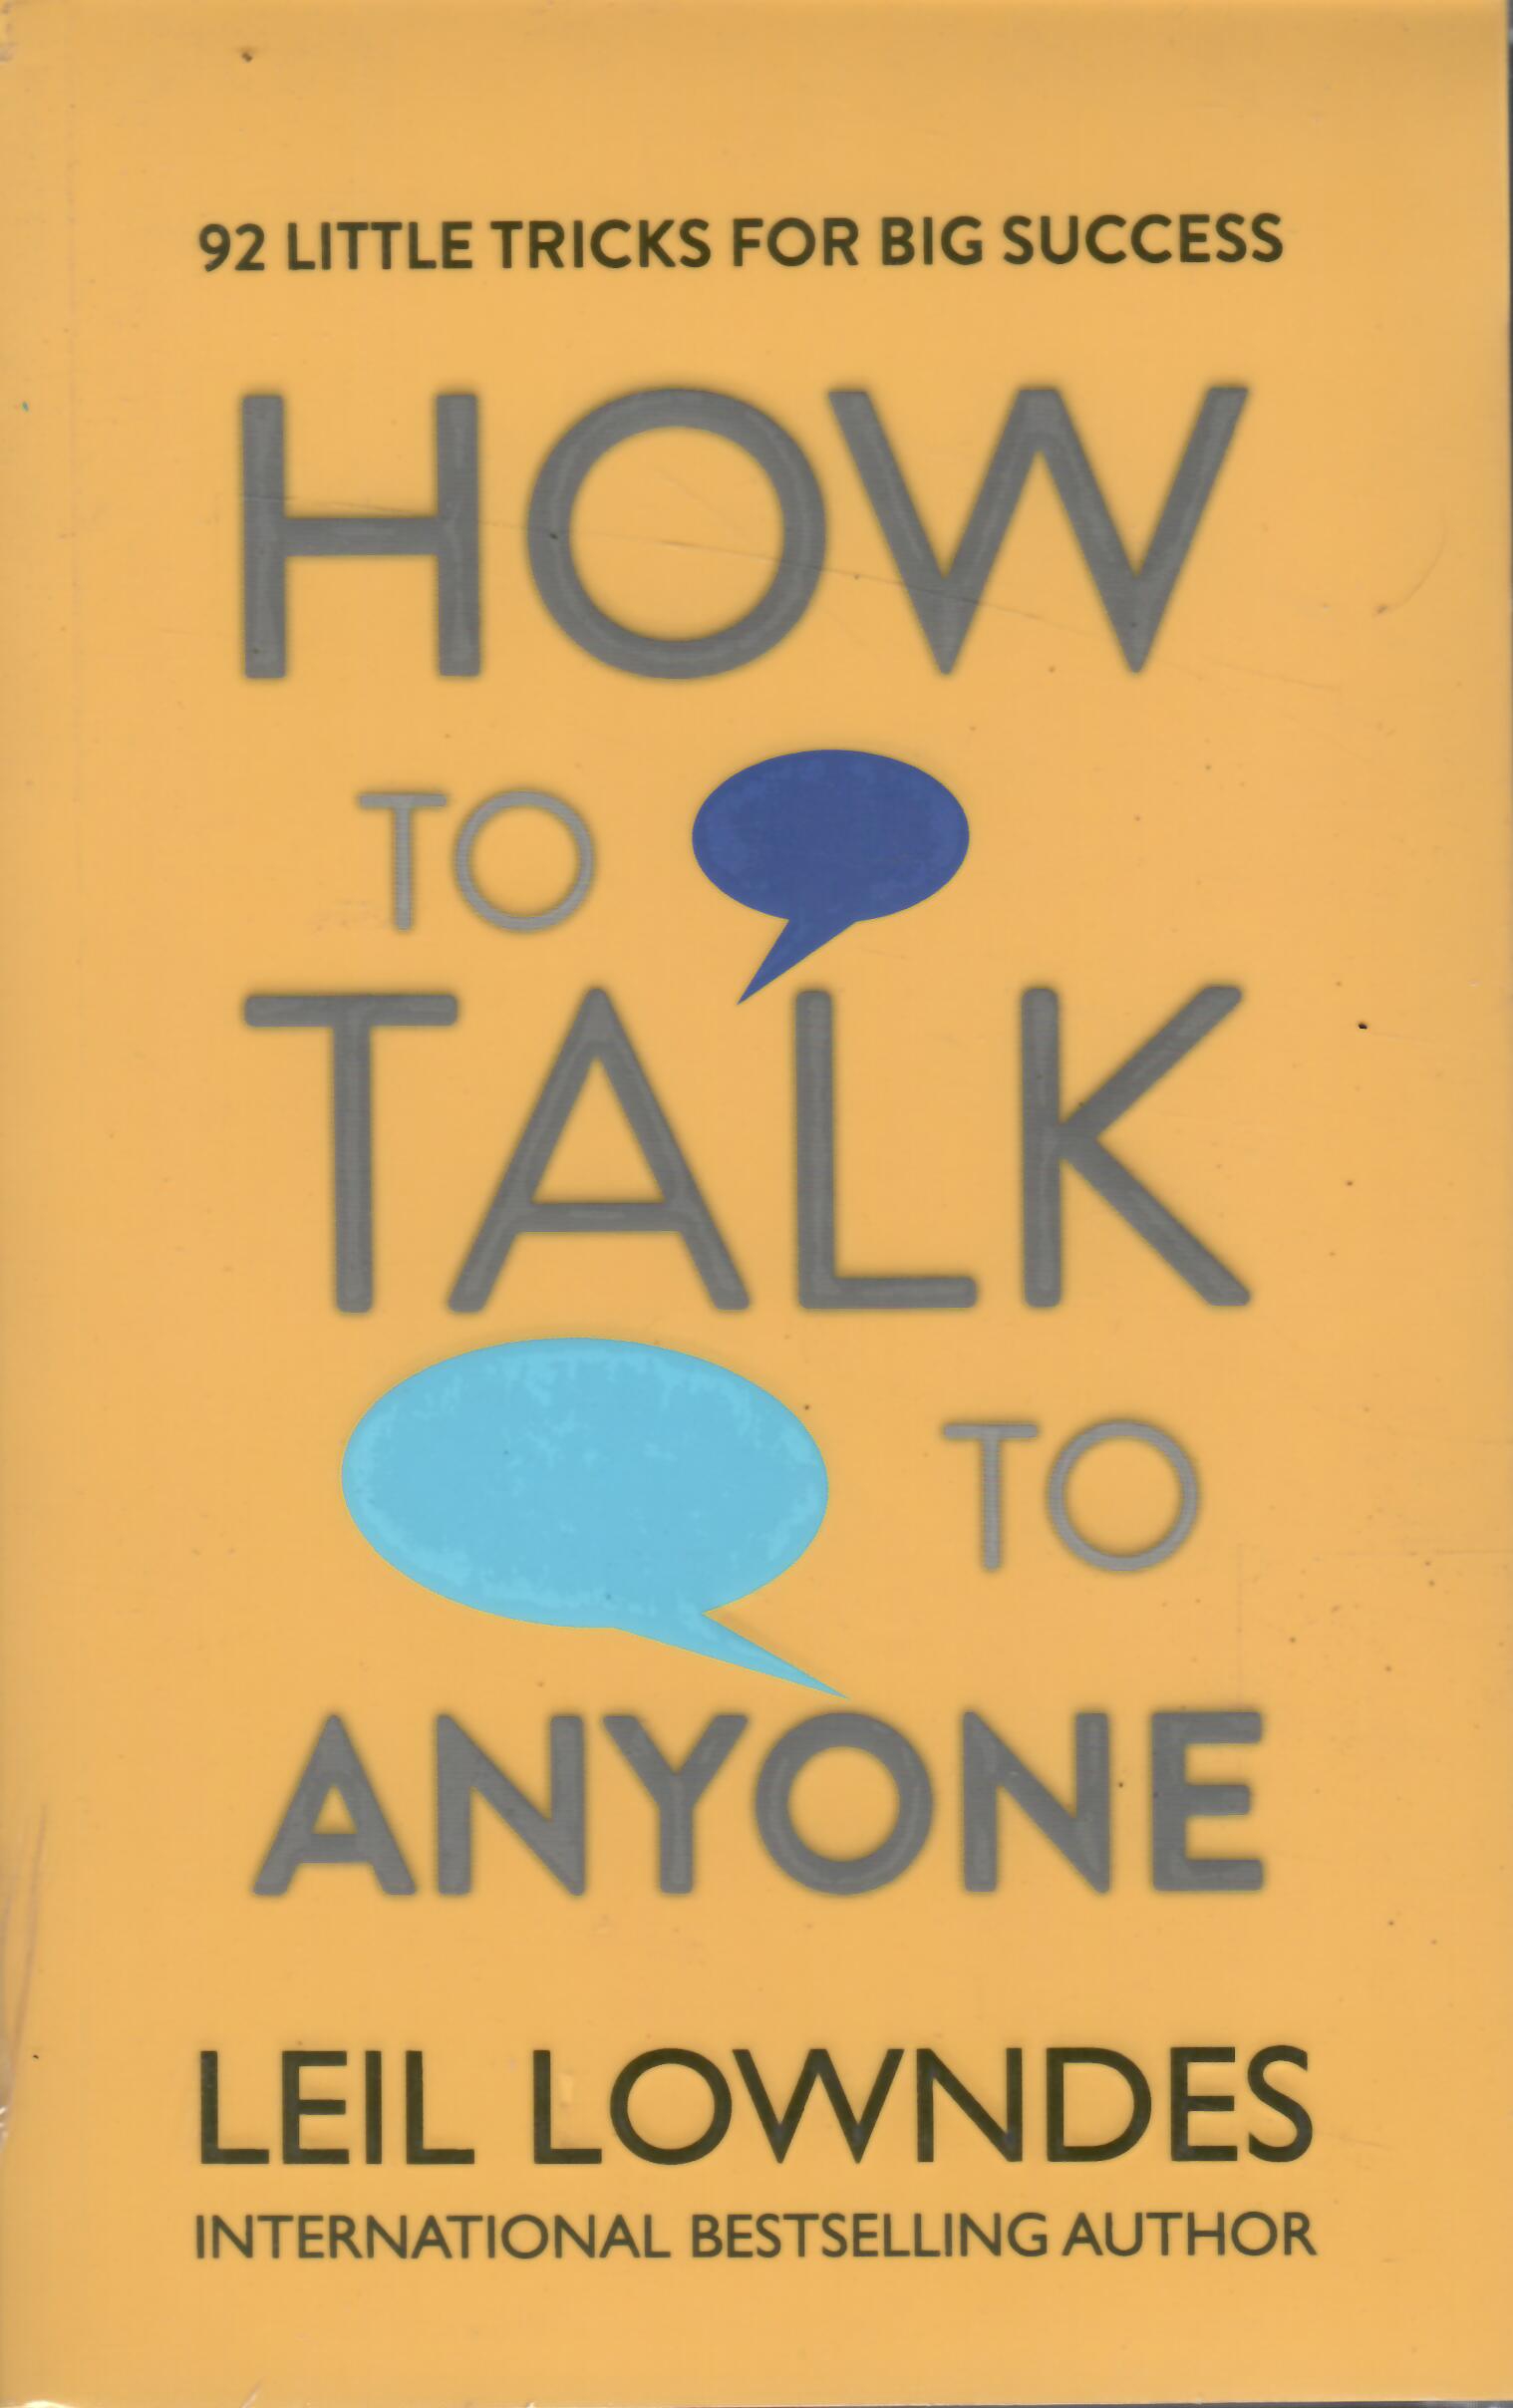 HOW TO TALK TO ANYONE